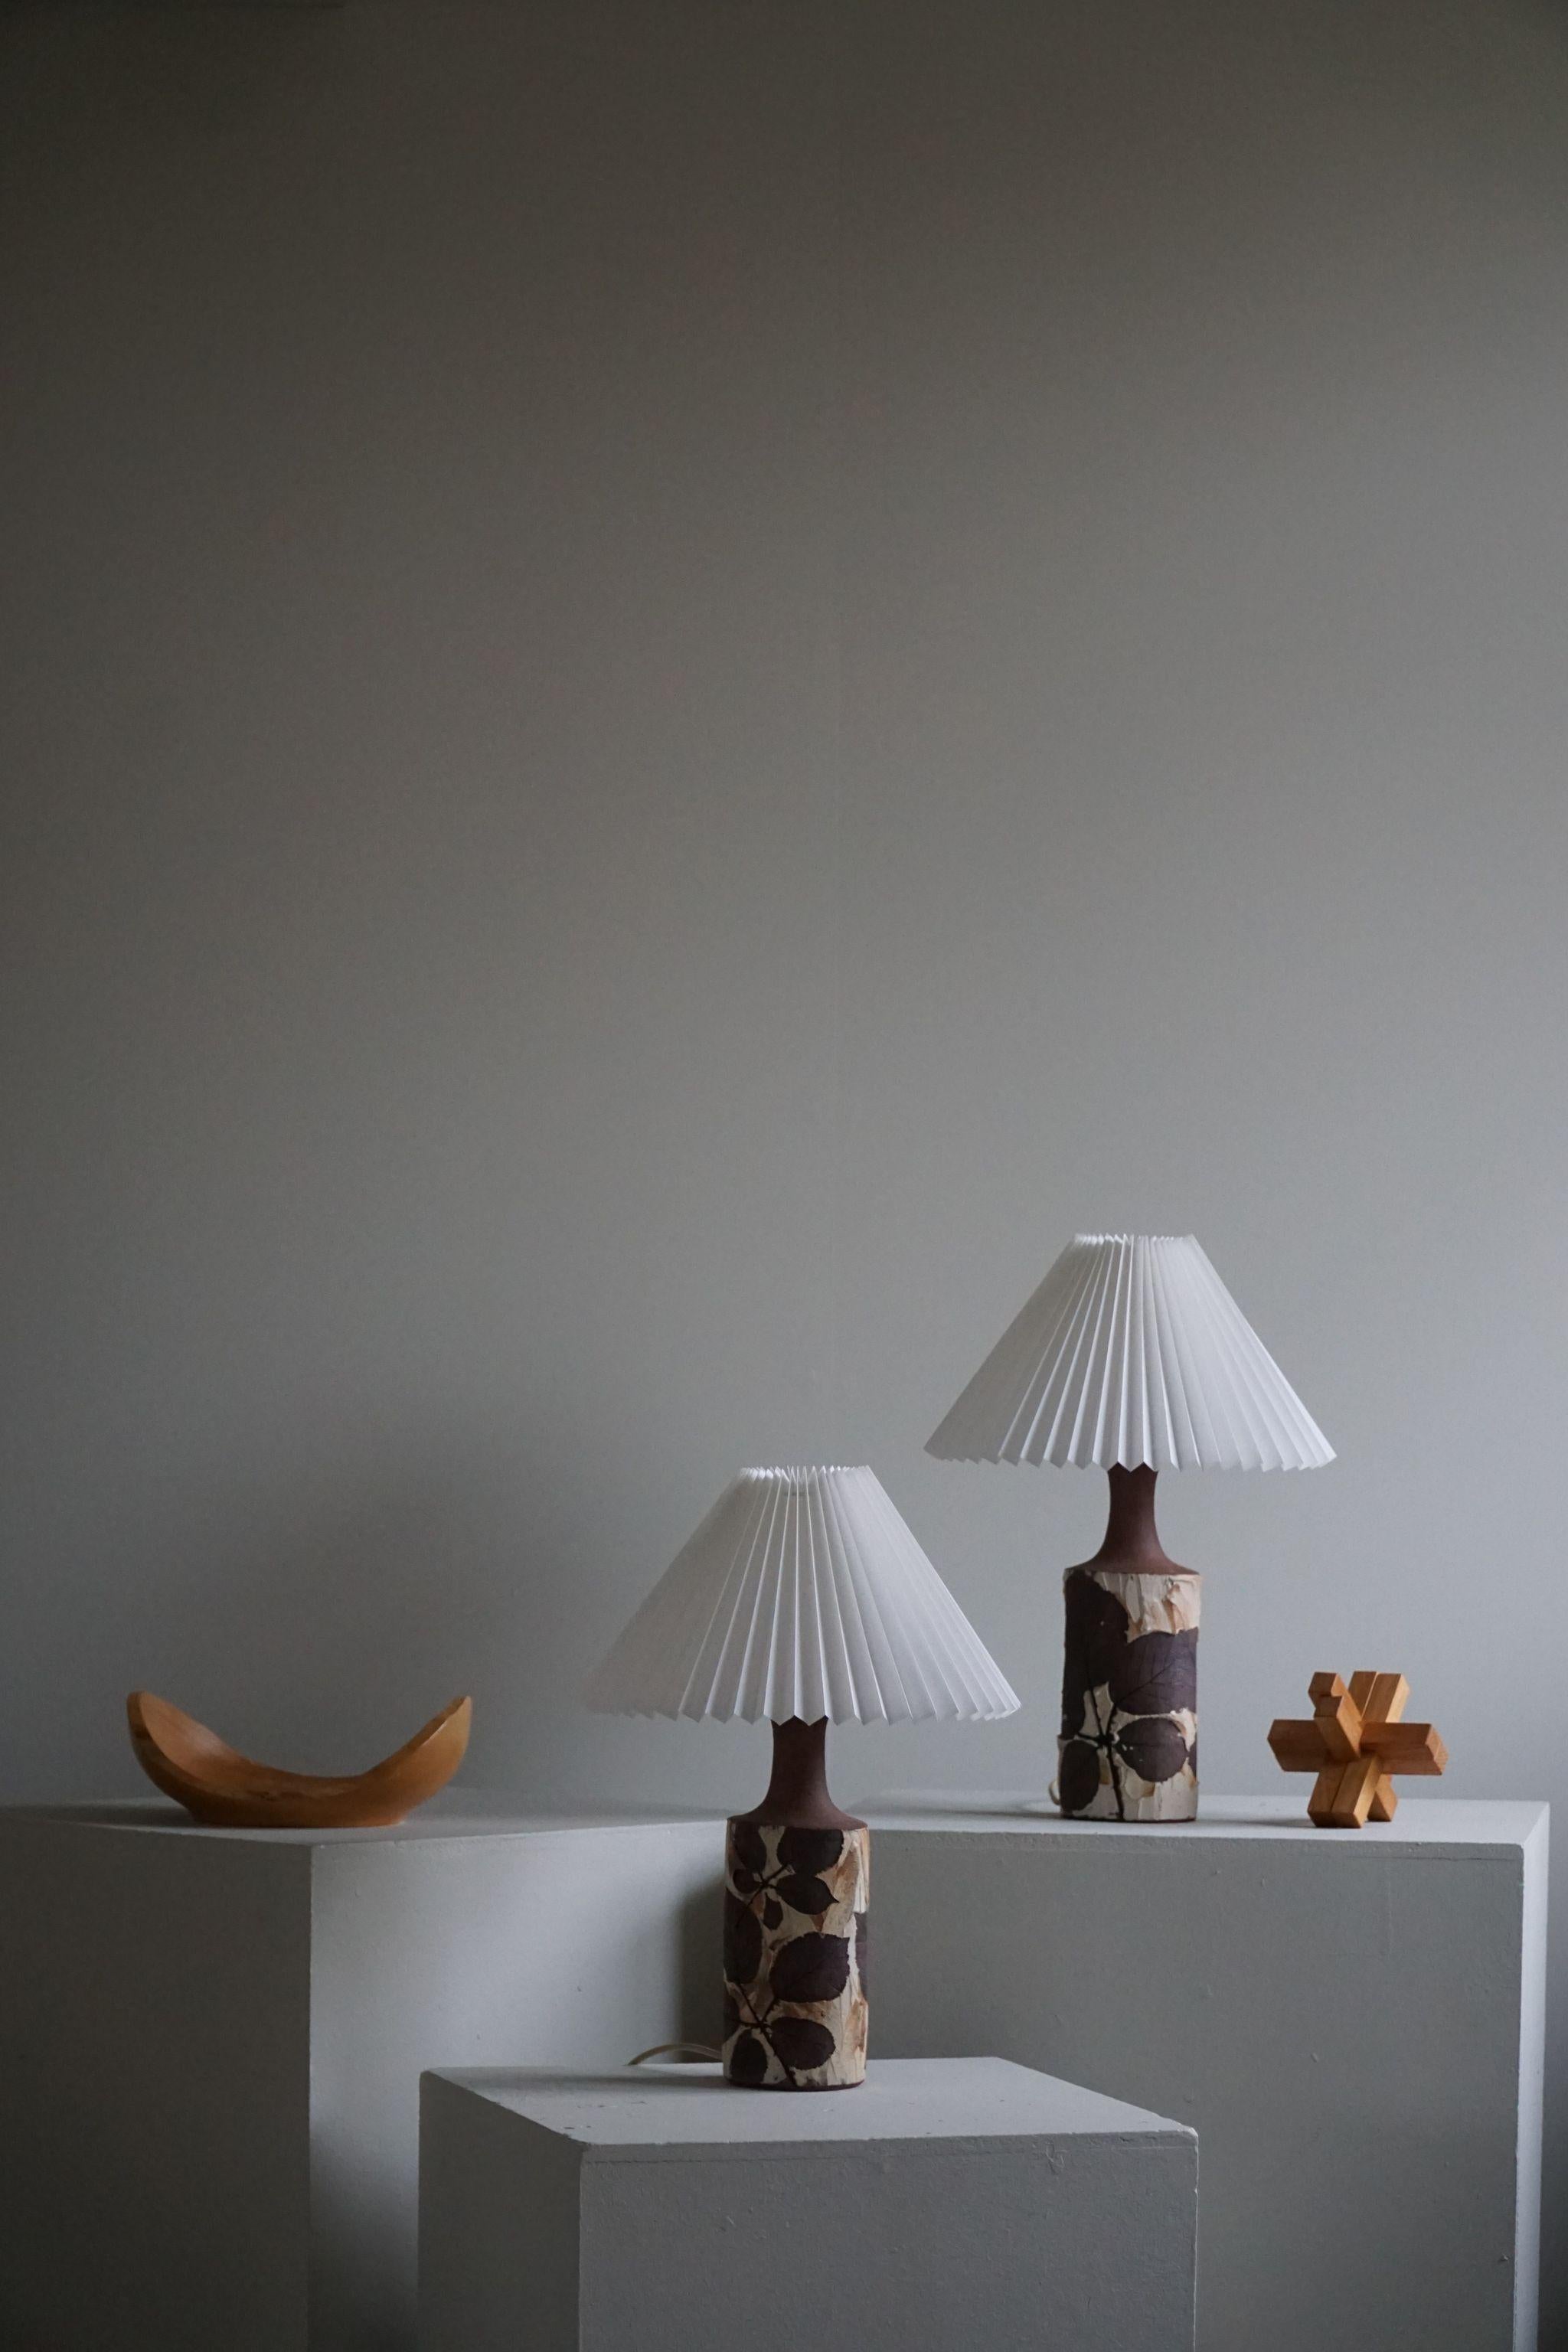 Decorative handmade set of 2 Danish Mid-Century Modern stoneware table lamps. Various beige / brown colors with some fine flower motifs. Designed by Bodil Marie Nielsen, Denmark, 1960s.
A great set well suited for the Modern interior or Scandinavian